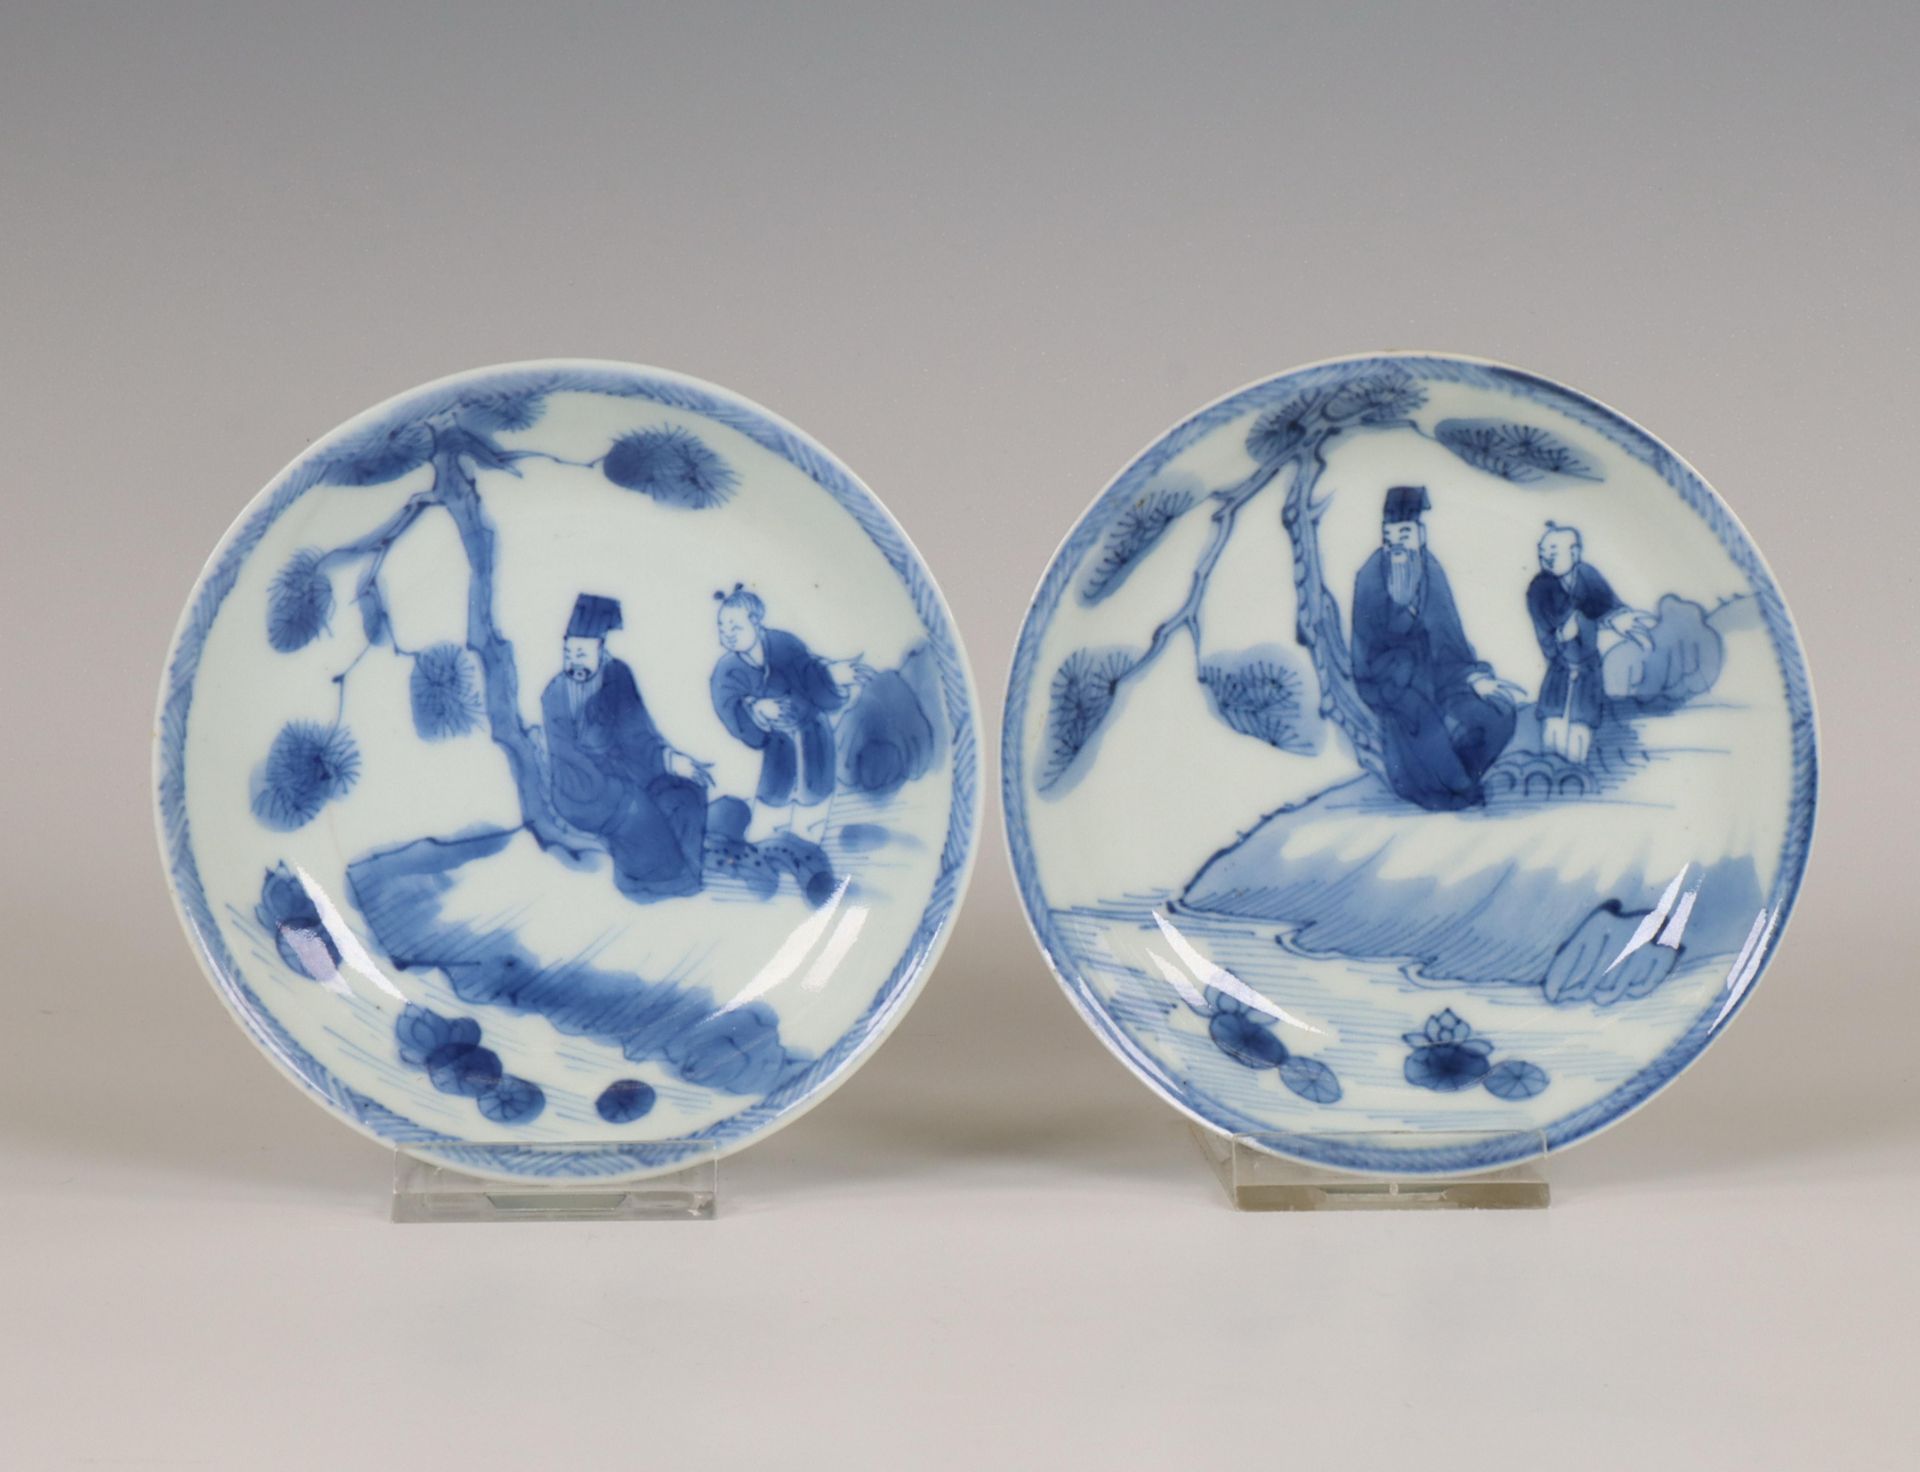 China, a pair of blue and white porcelain saucer dishes, Kangxi period (1662-1722),